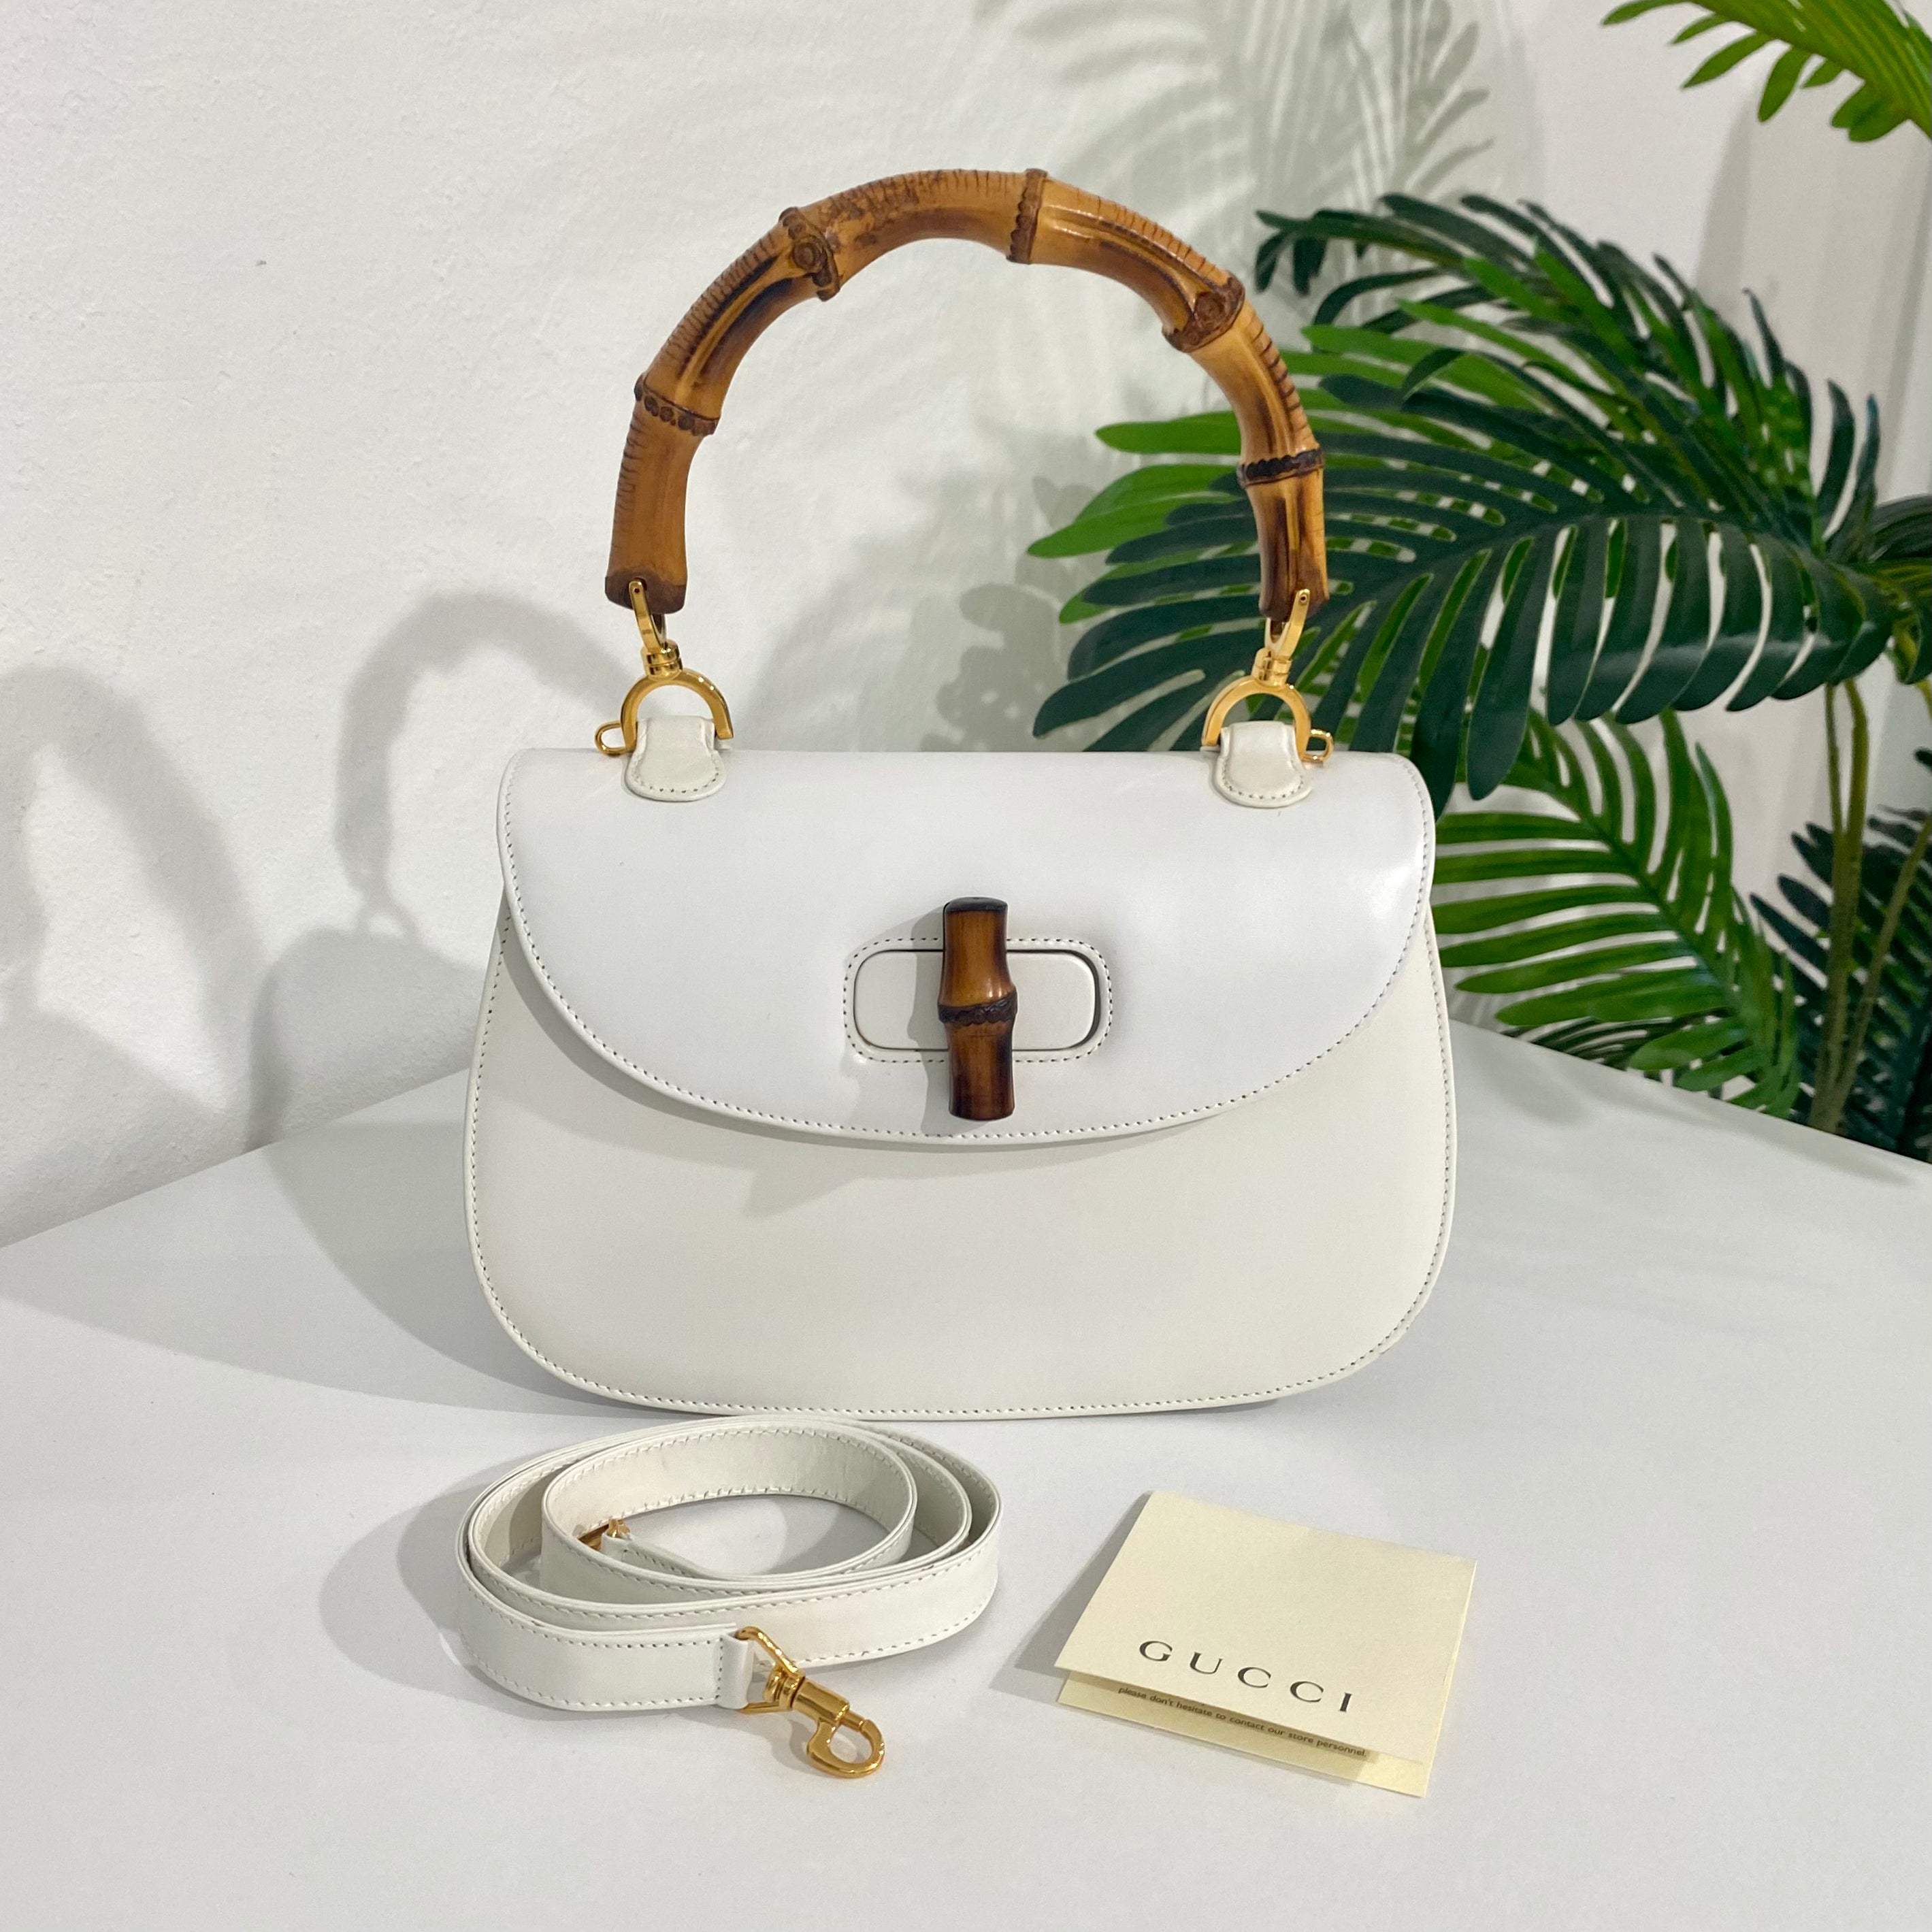 GUCCI Bamboo Hand Bag Leather 2way White Auth 45862 ref.969450